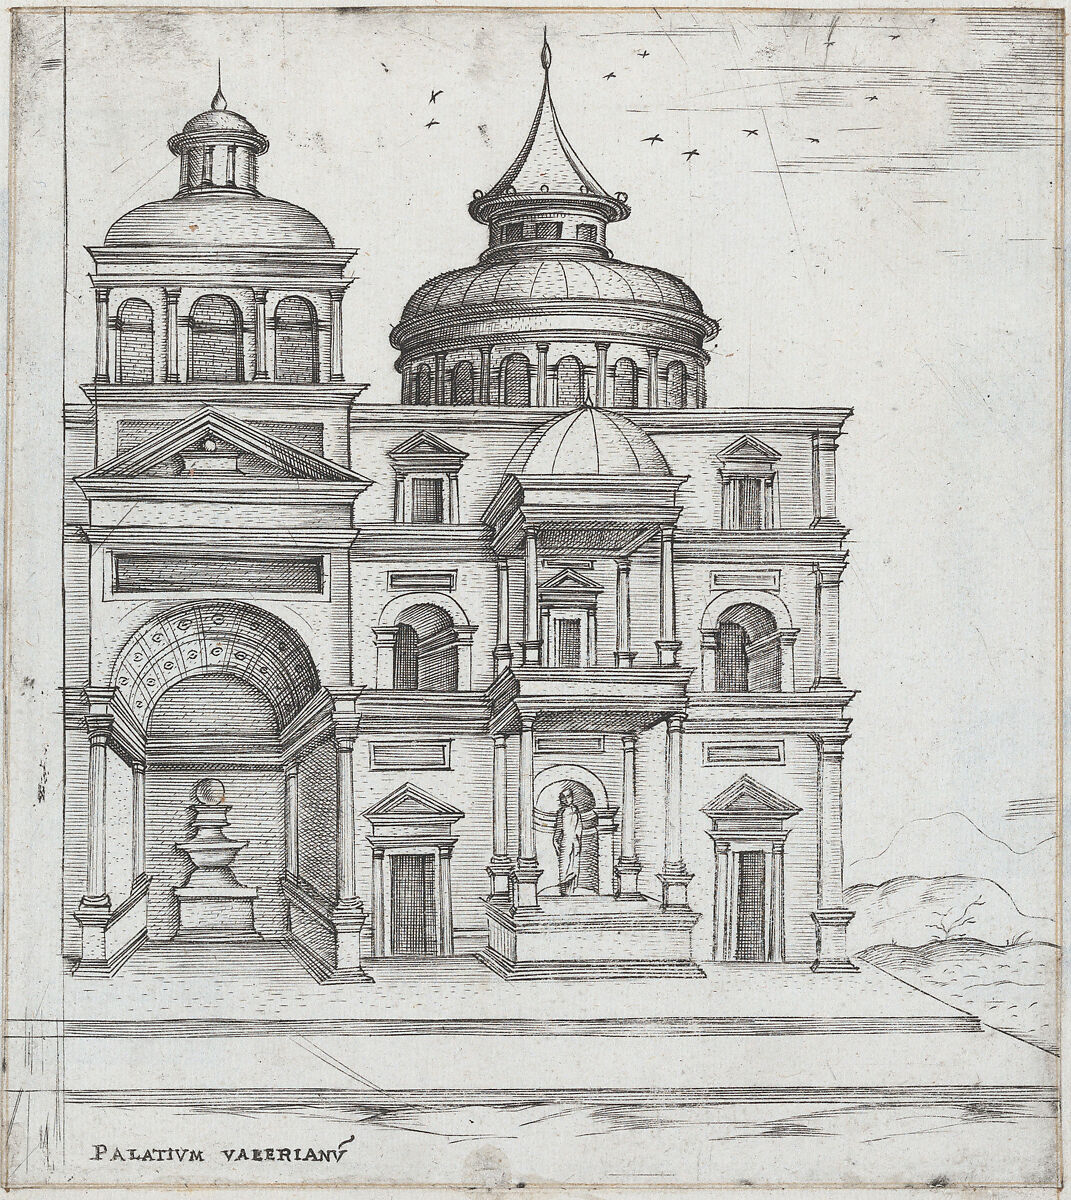 Palatium Valerianu[m], from a series of prints depicting (reconstructed) Buildings from Roman Antiquity, Formerly attributed to Monogrammist G.A. &amp; the Caltrop (Italian, 1530–1540), Engraving 